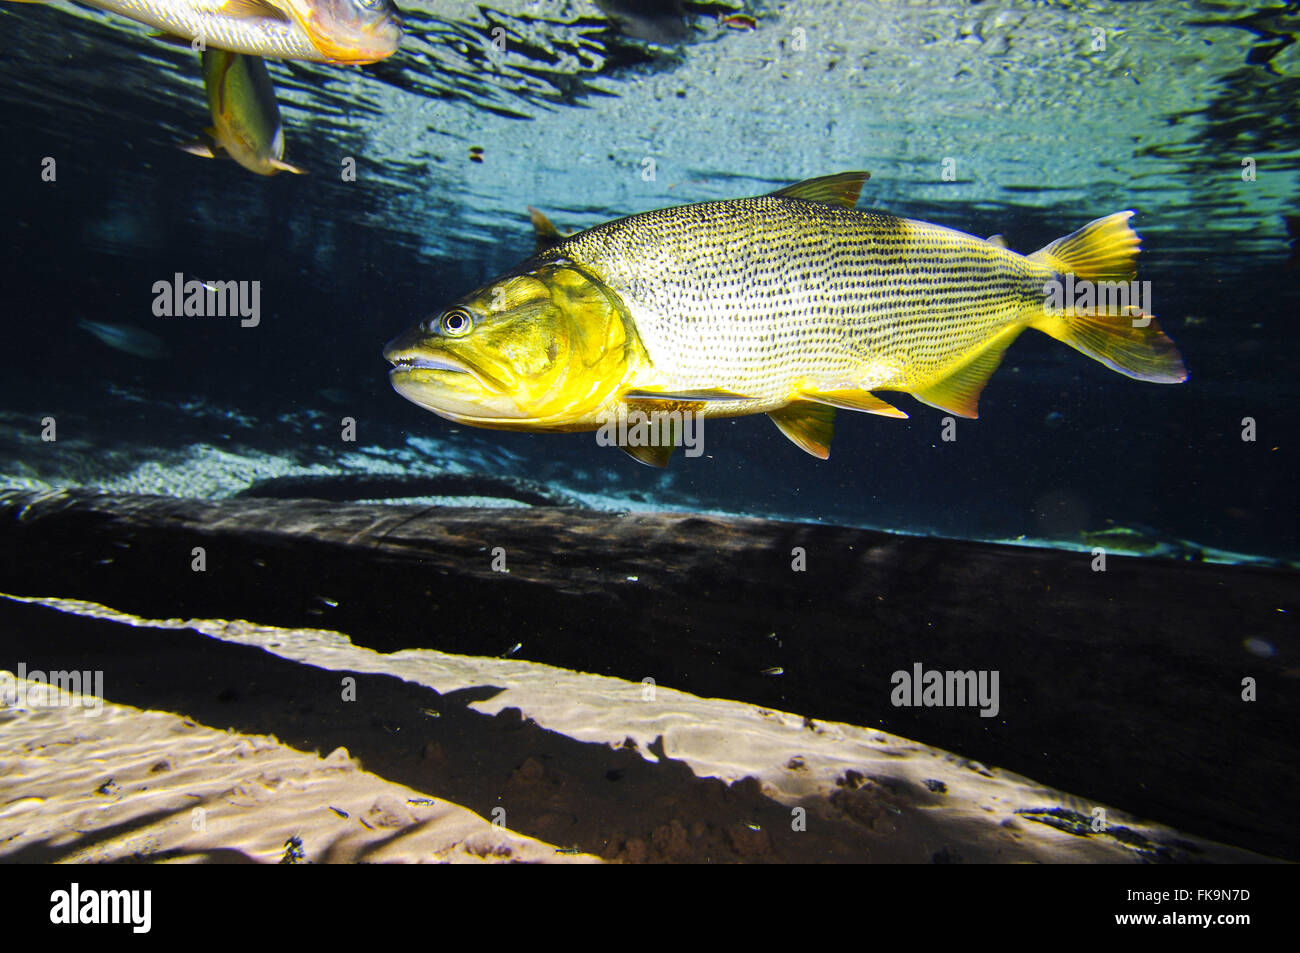 Gold - Salminus brasiliensis - swimming in the River Plate Basin Stock Photo